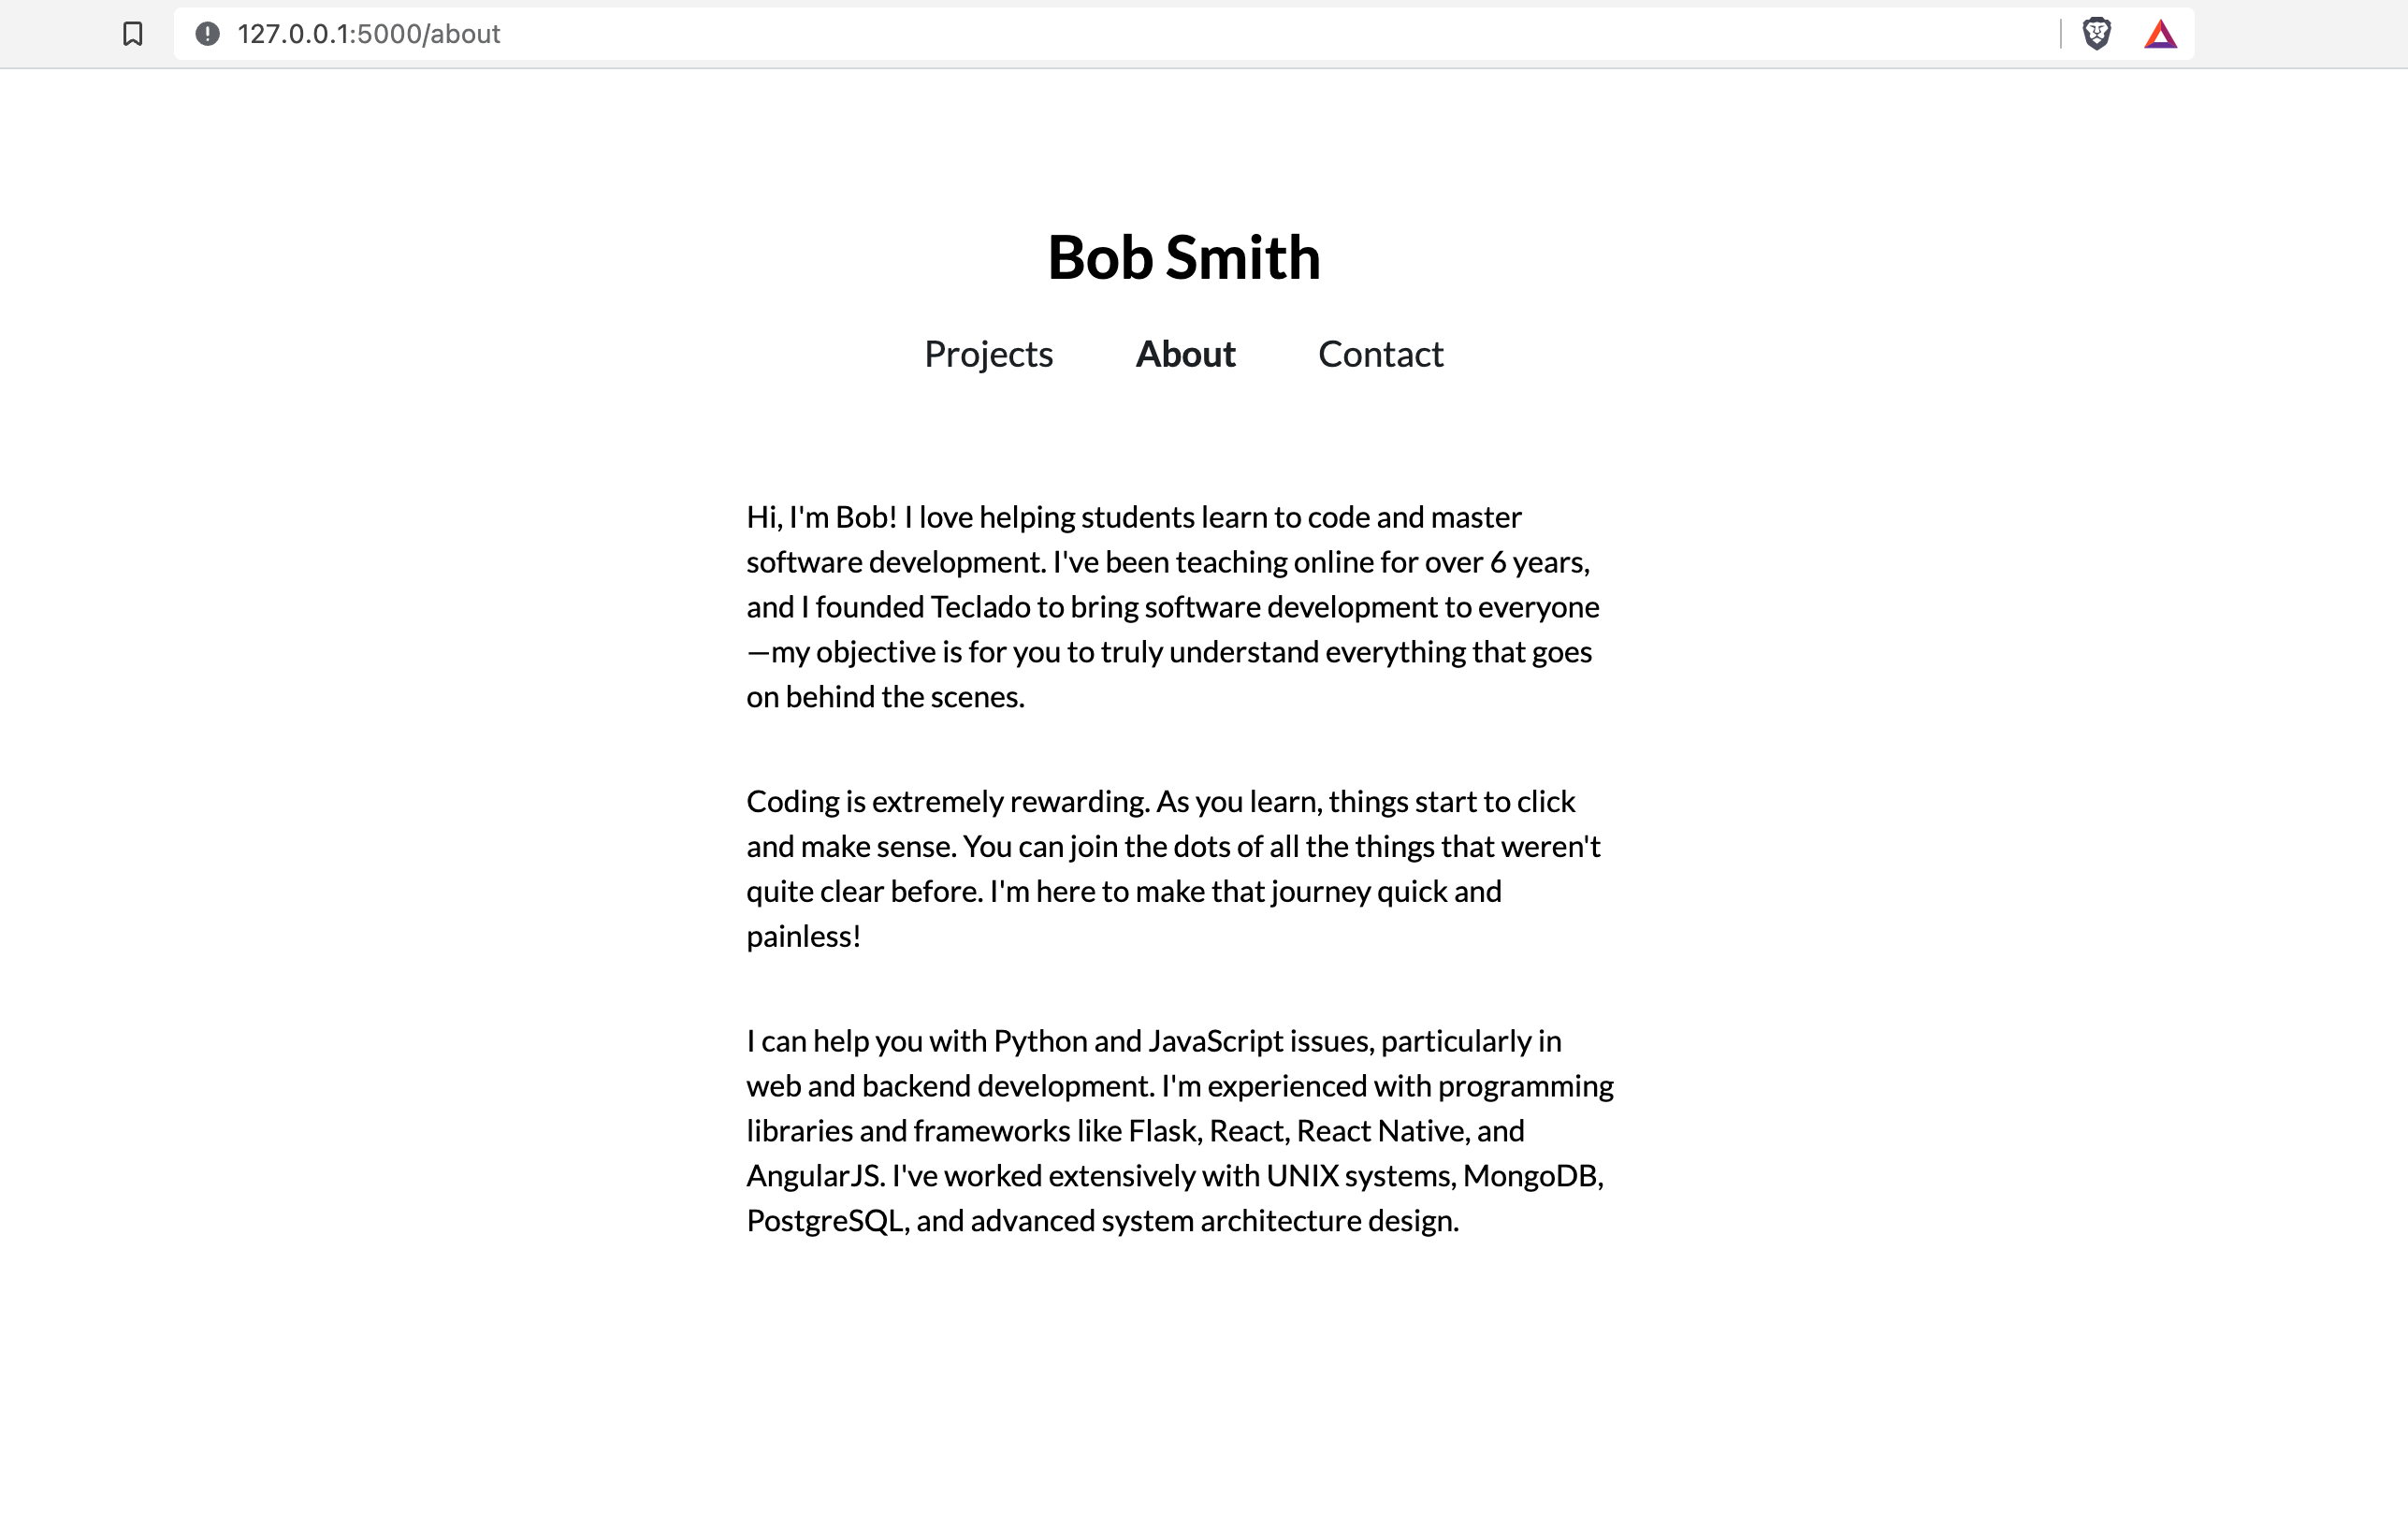 The about page, showing some information about the creator of the app